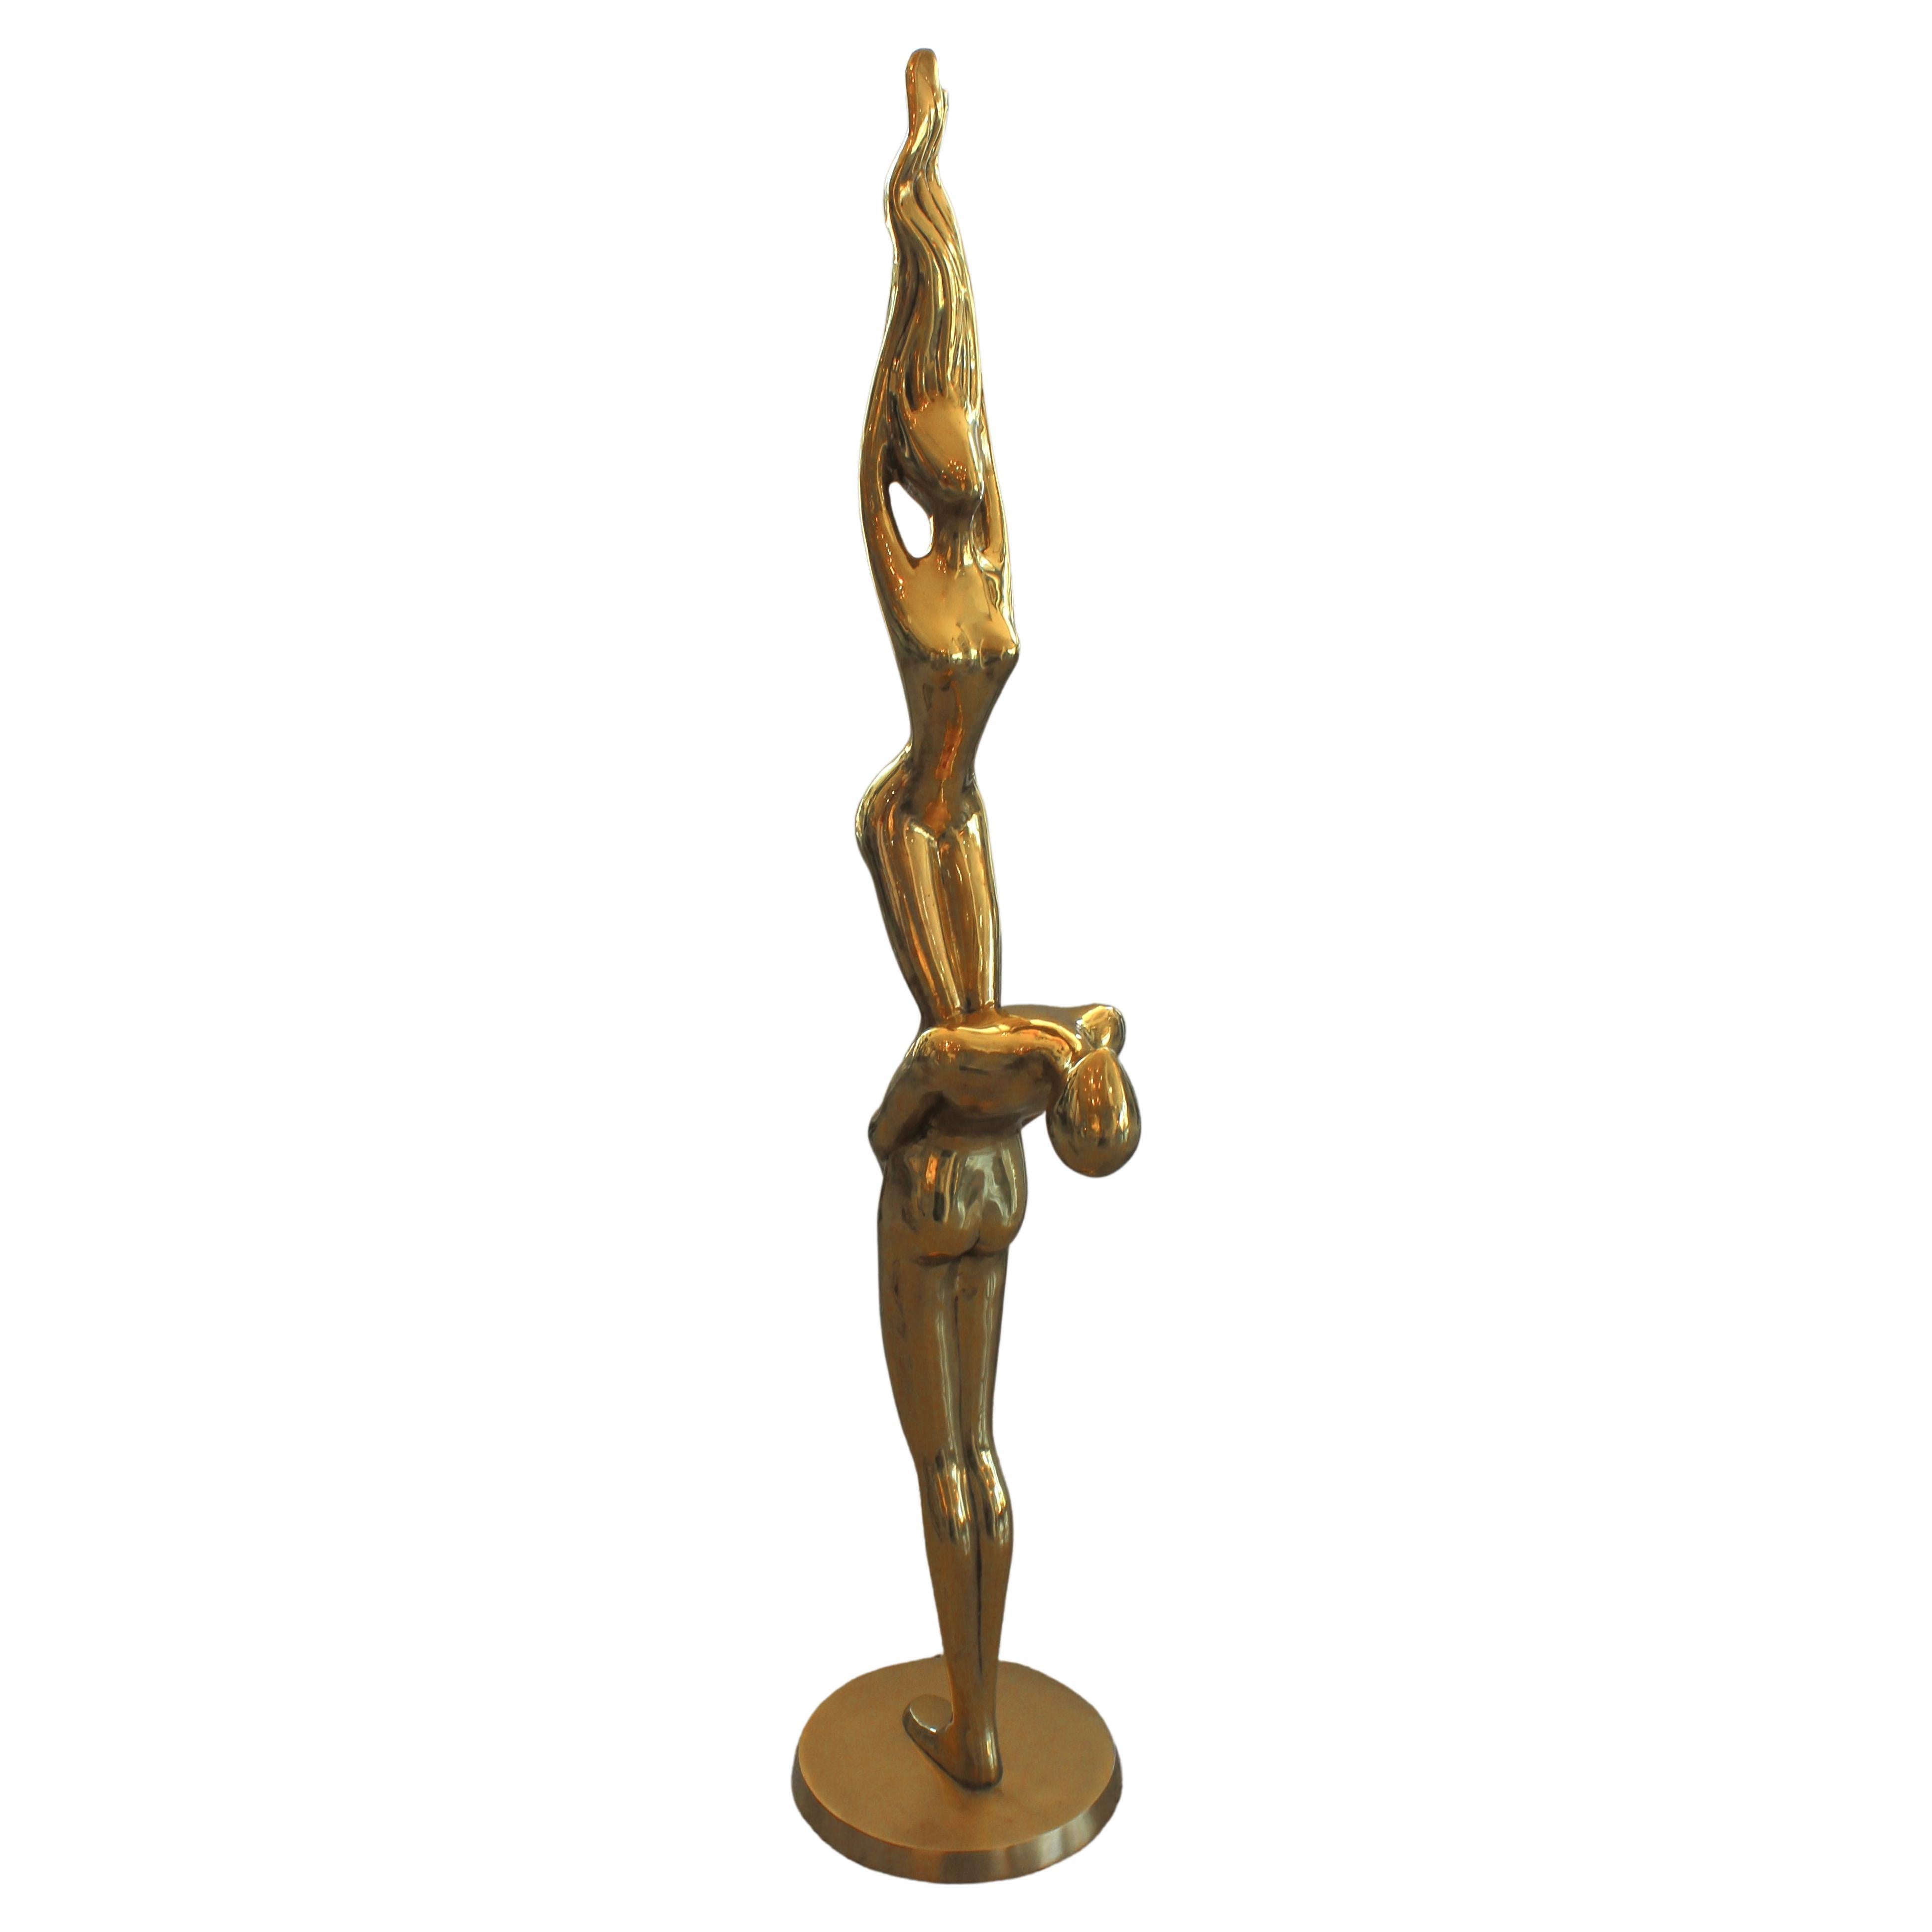 Thi stylish and chic 1970s sculpture depicting two stylized nude acrobatic figures will make a statement with its large scale, form and use of materials.

Note: The base is in a satin finish and the sculpture itself in a natual, patinated finish.